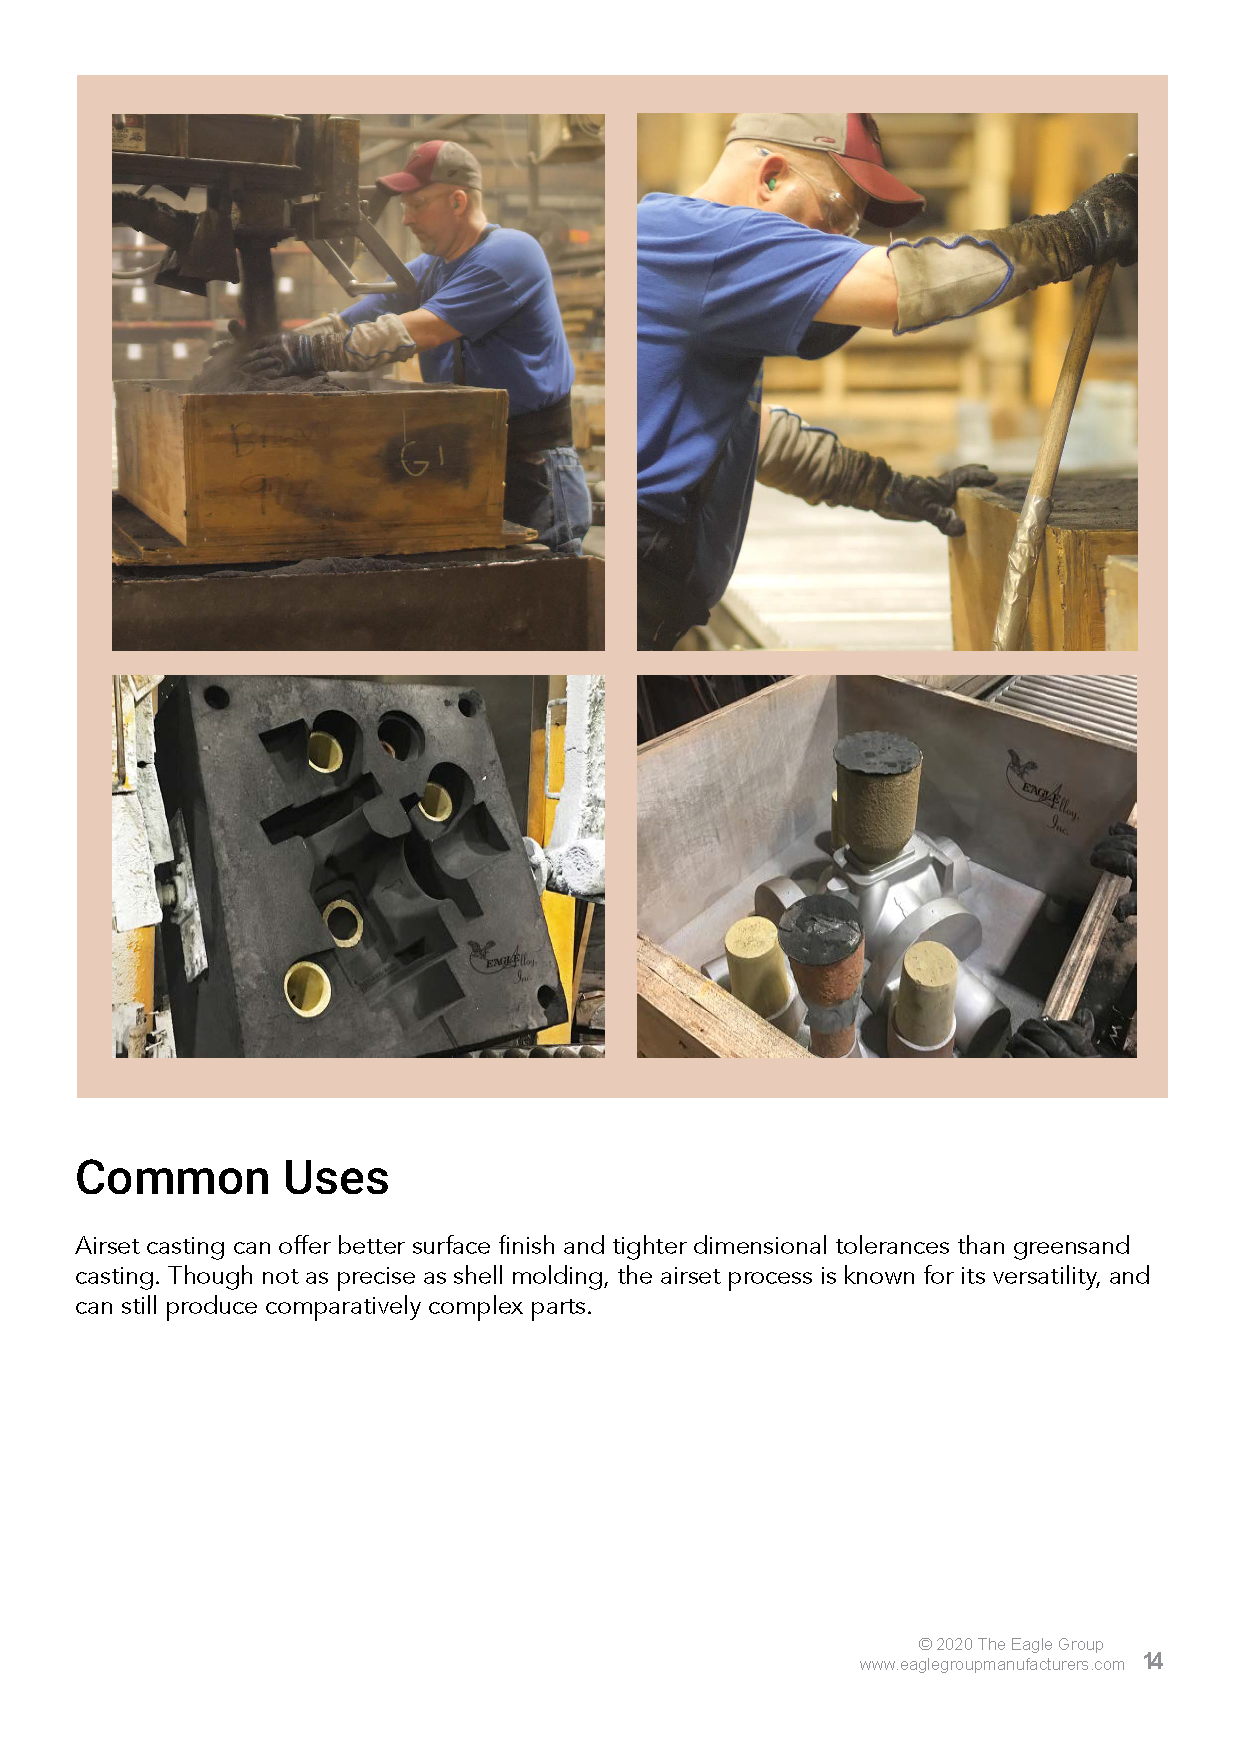 History, Uses, and Best Practices of Key Metalcasting and CNC Machining Processes(图14)